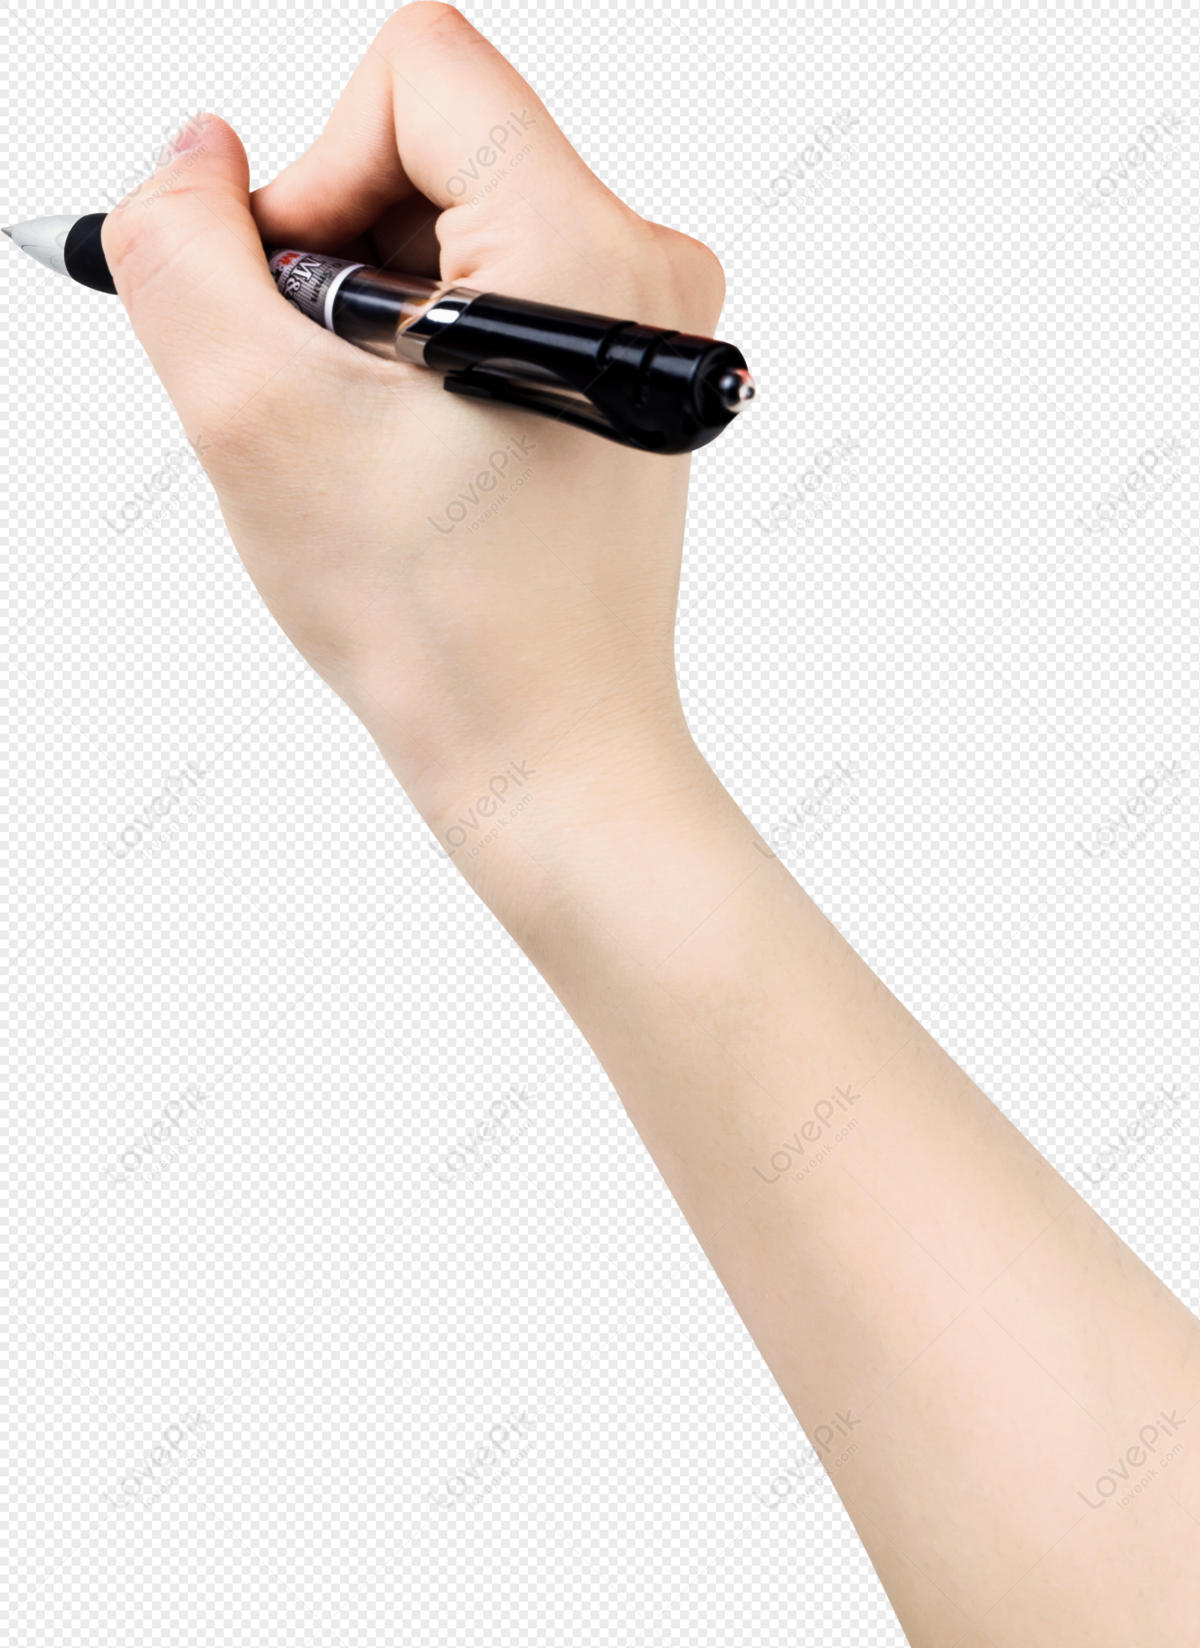 The hand of writing, paint, writing, pen png transparent background